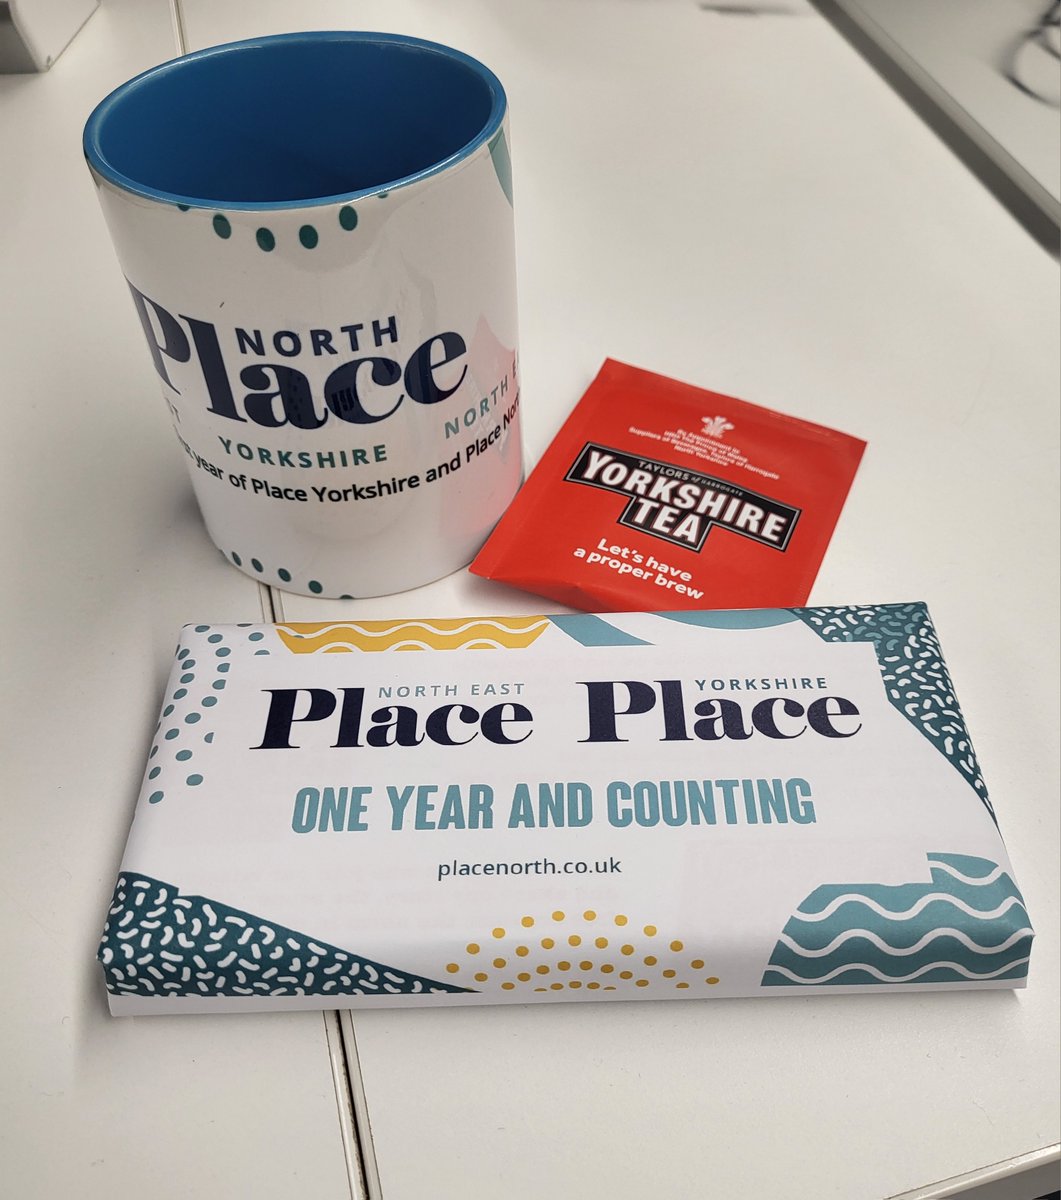 Enjoying our afternoon brew, what a treat to brighten up a grey Thursday! Thanks to the @PlaceNorth_ team & happy one year to @PlaceNorthEast & @PlaceYorkshire_, great to work together🎉@Dinoatwork